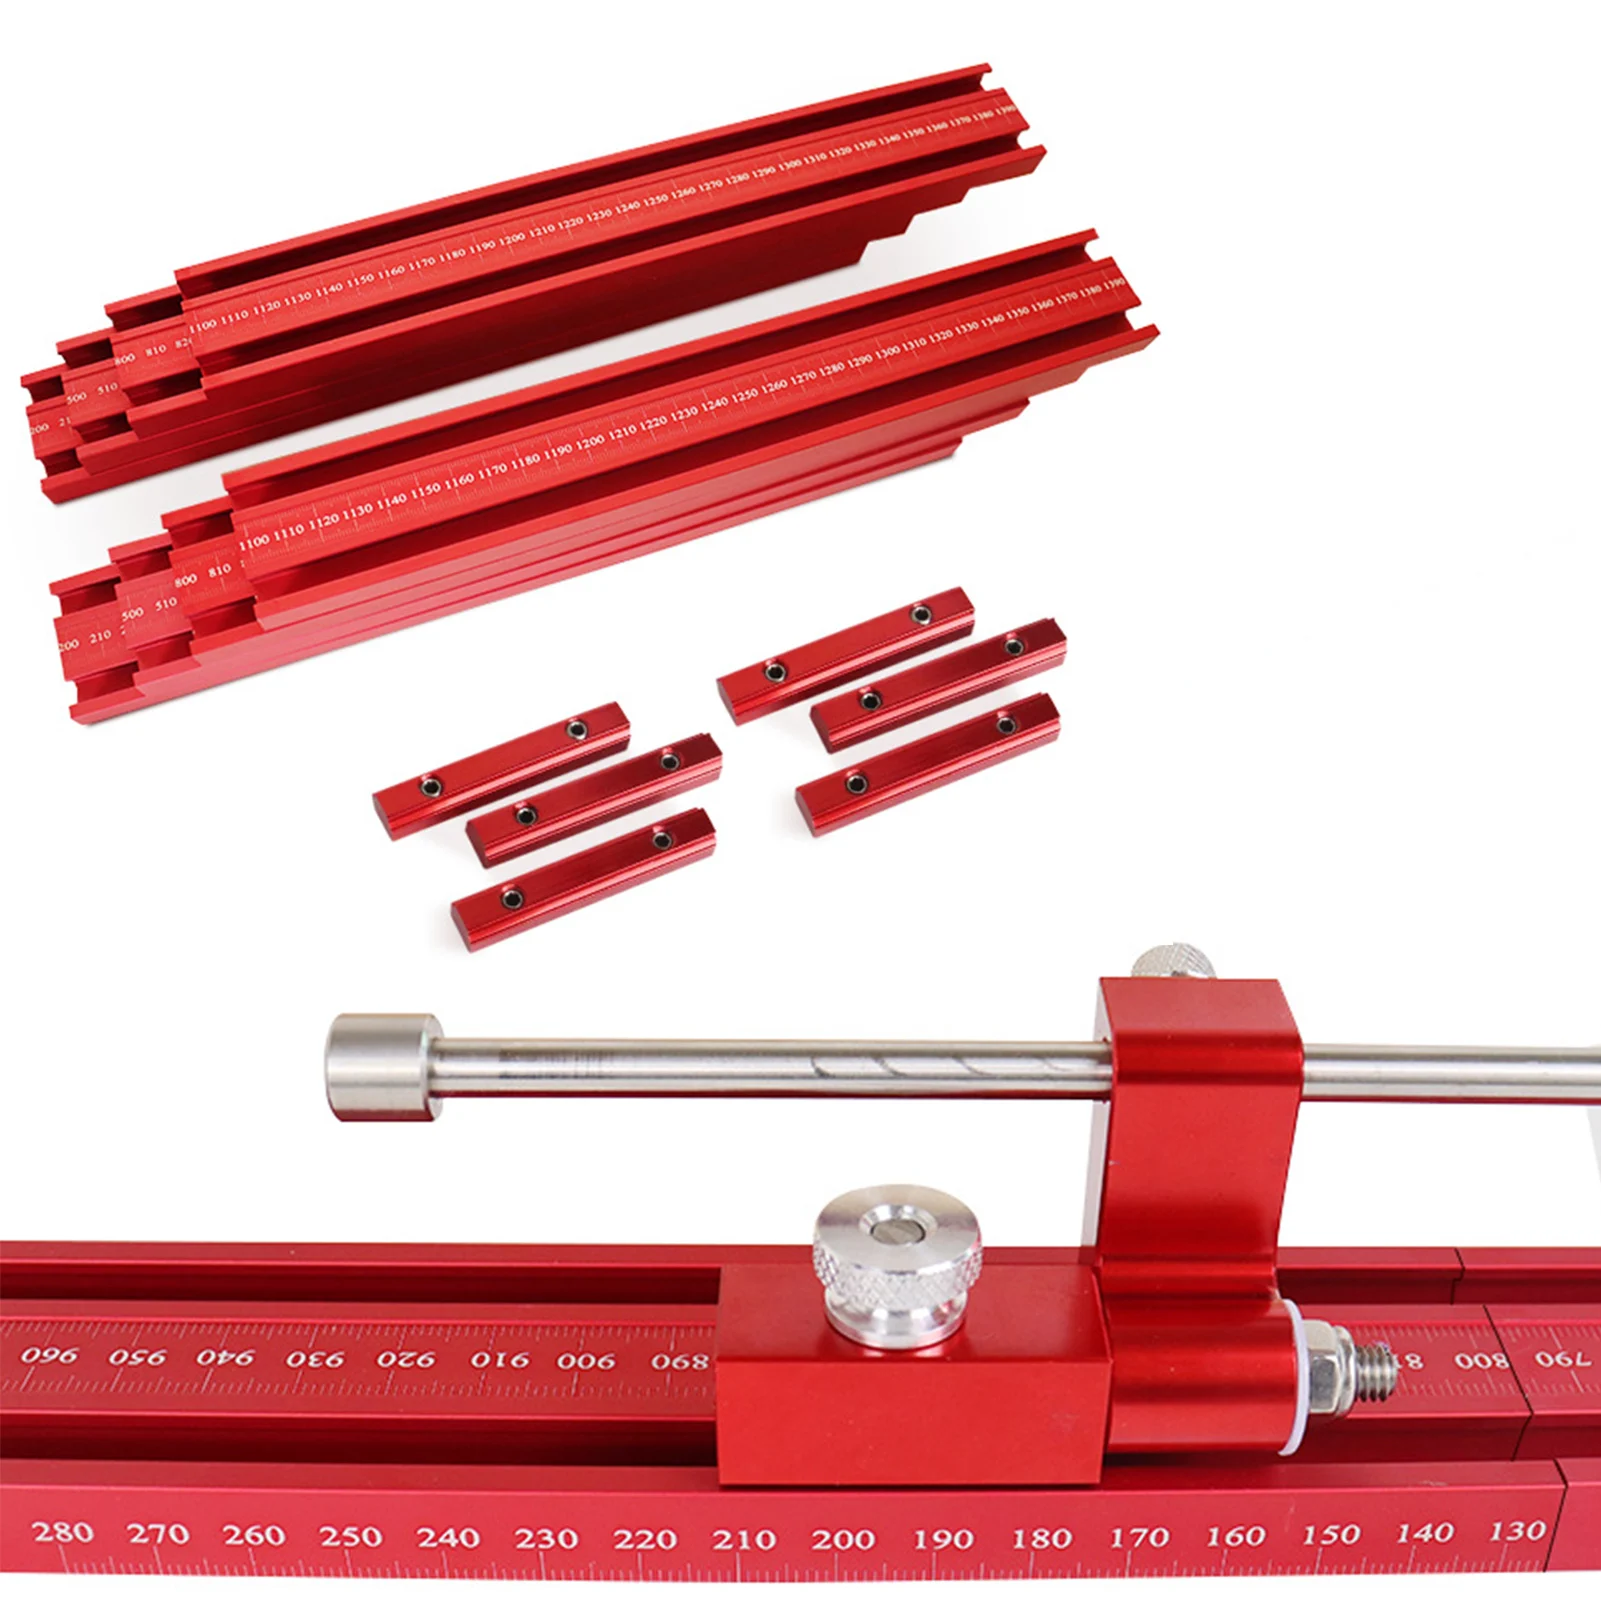 42-Piece Set Of Track Saw Rail Parallel Guide Rail Aluminium Alloy T-Track Slot Woodworking Auxiliary Track Woodworking Tool